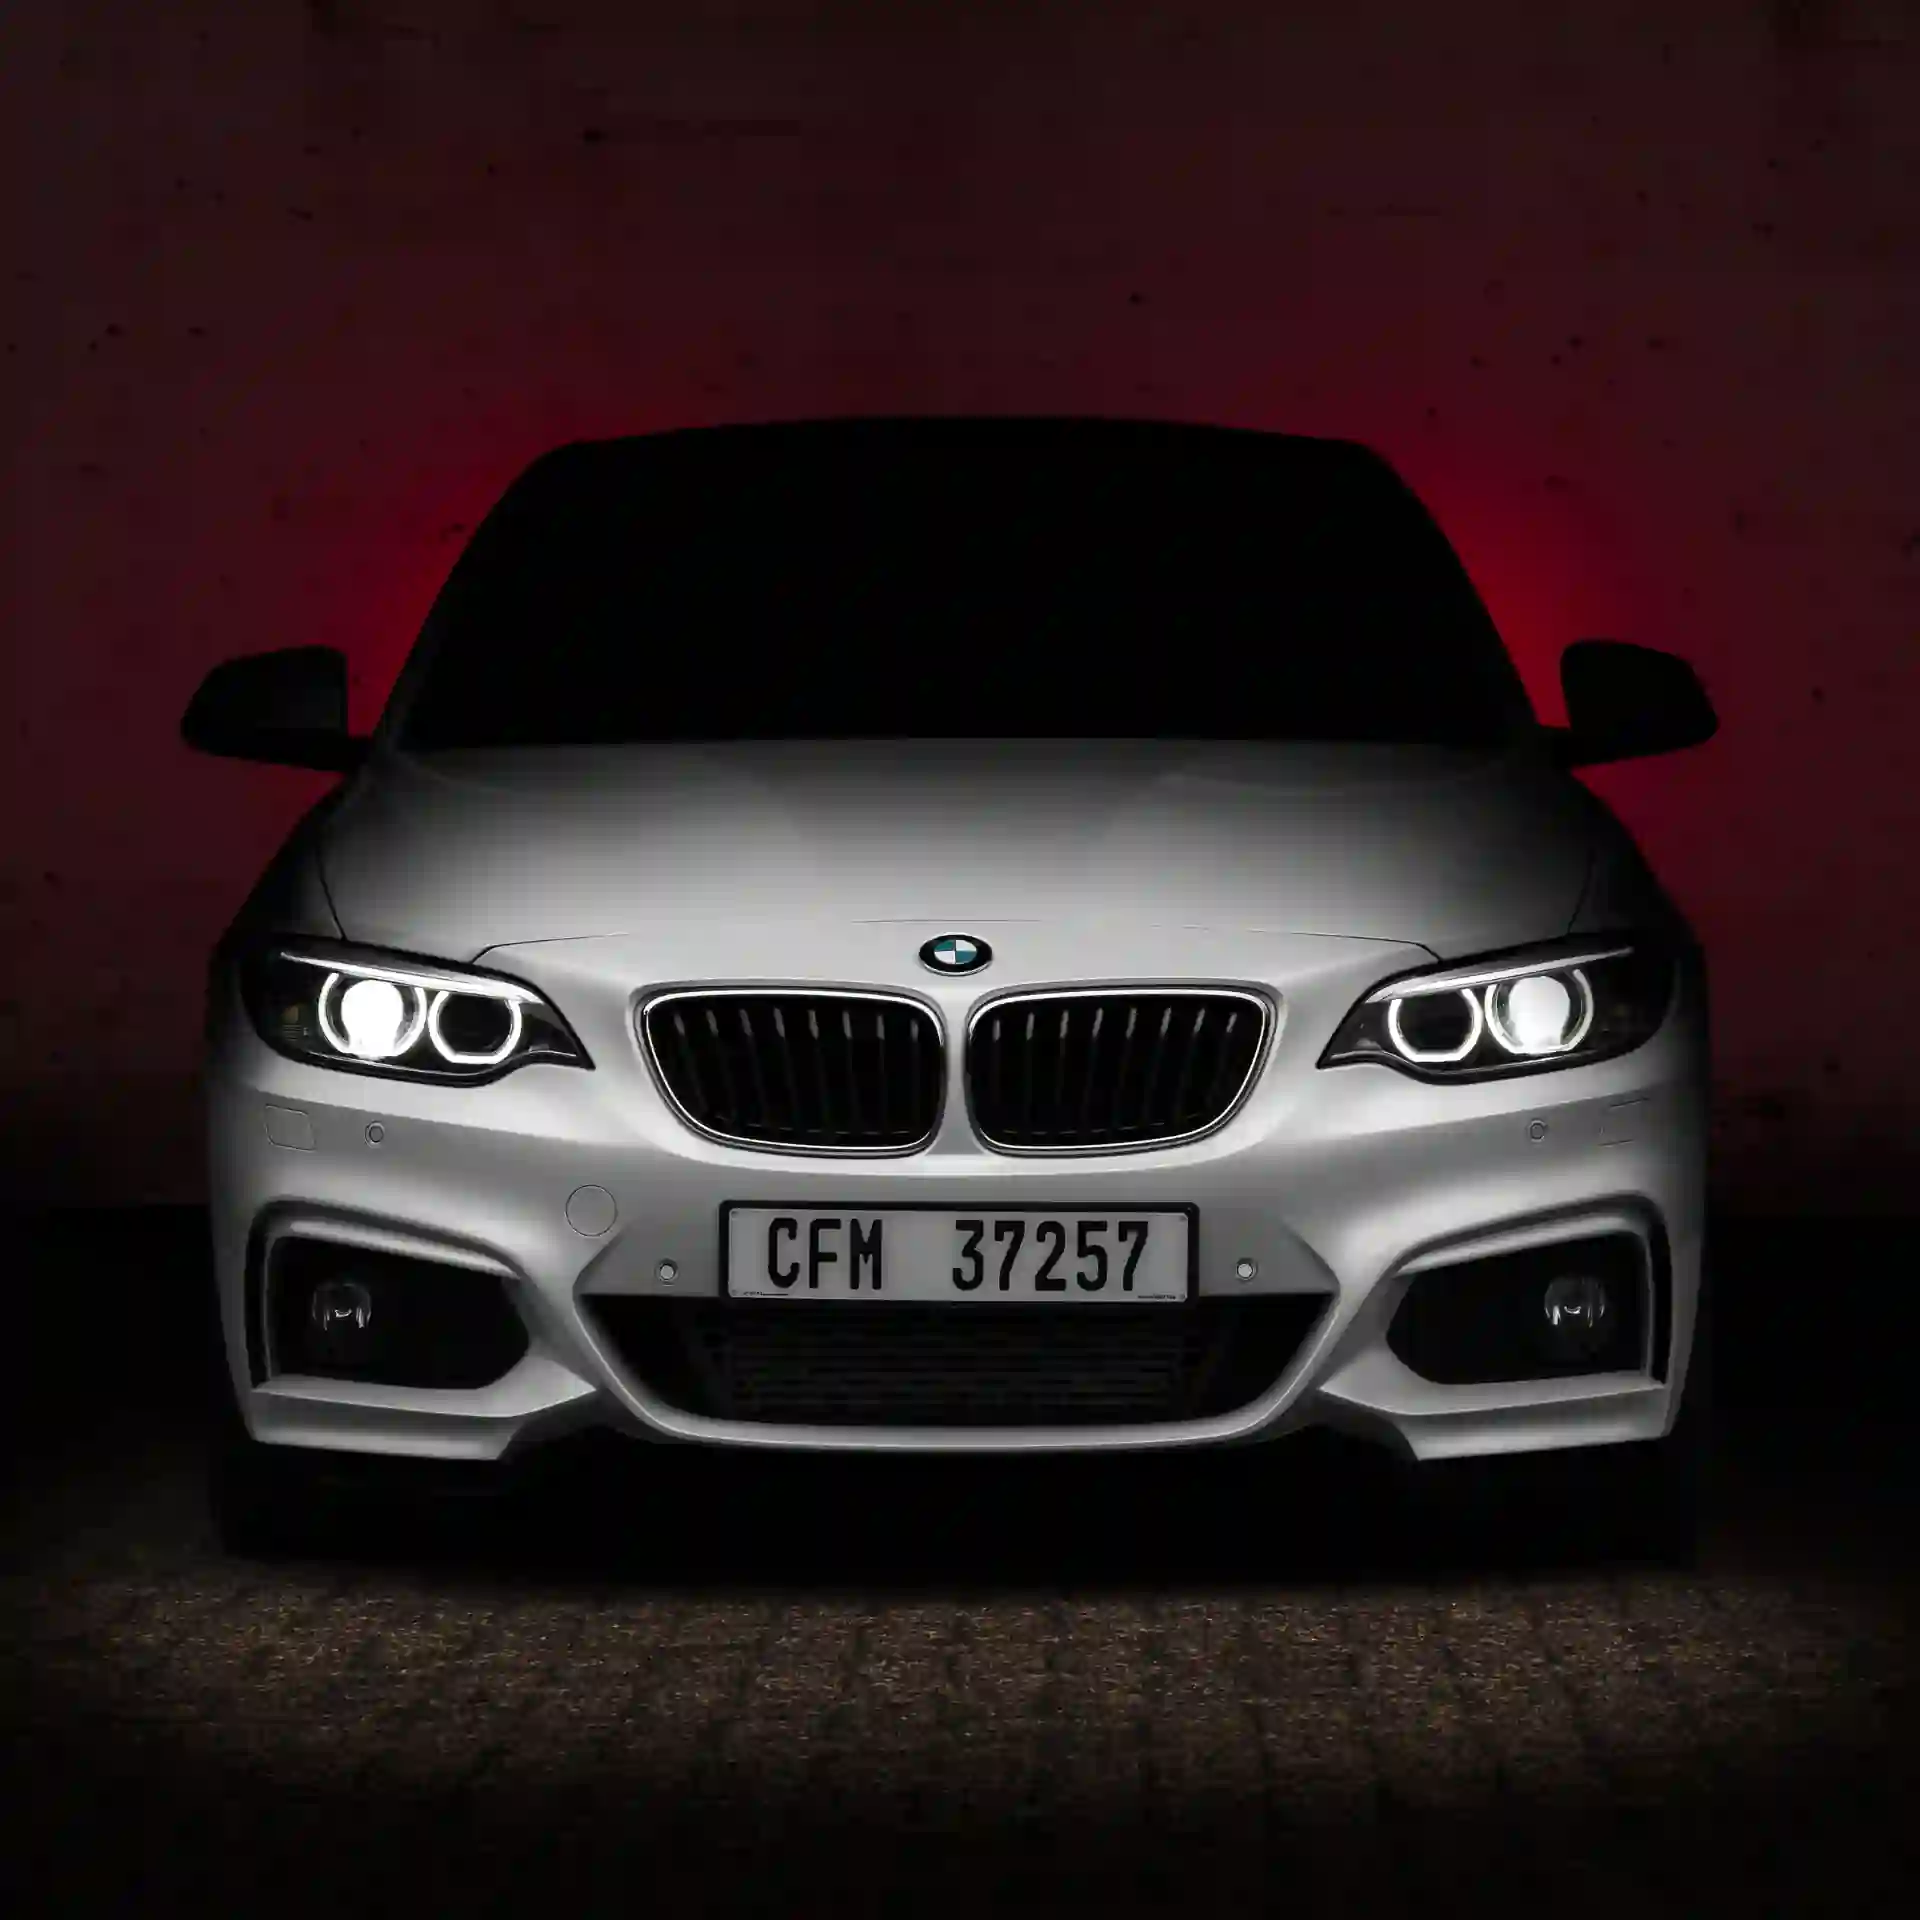 bmw pic for whatsapp dp